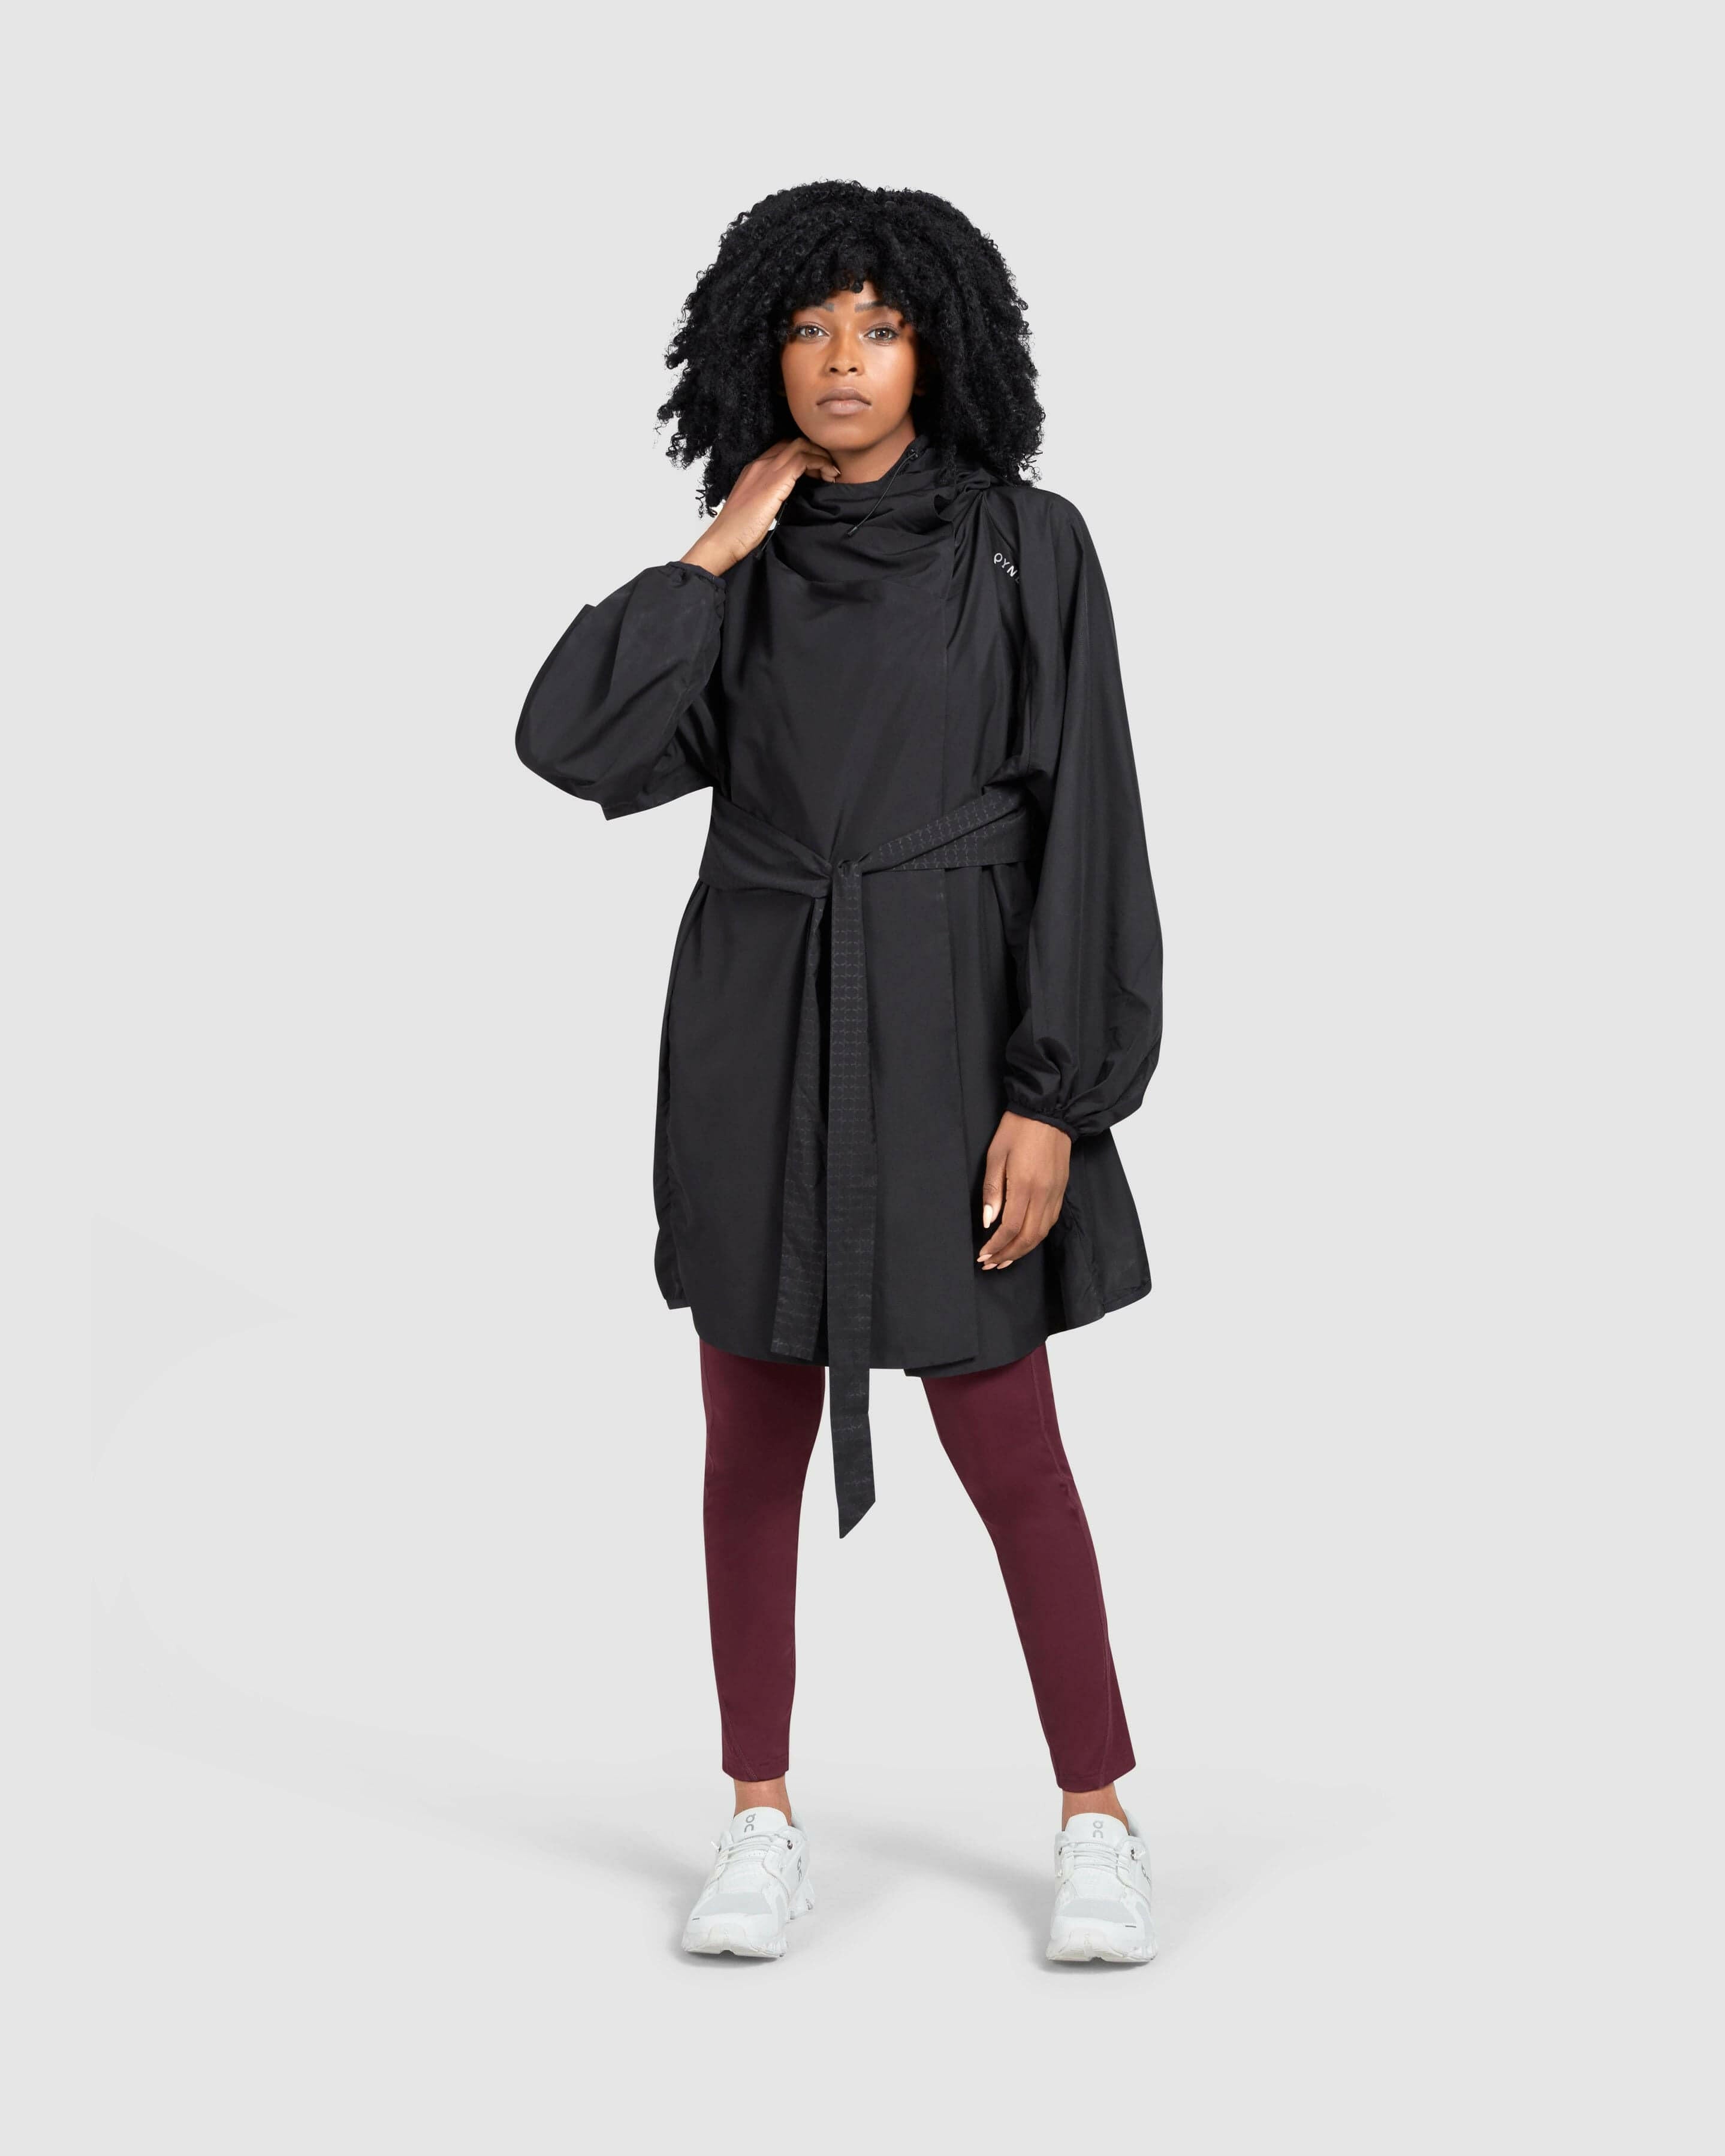 A woman in a stylish black COOLDOWN coat by Qynda, maroon leggings, and white sneakers, posing confidently against a white background.